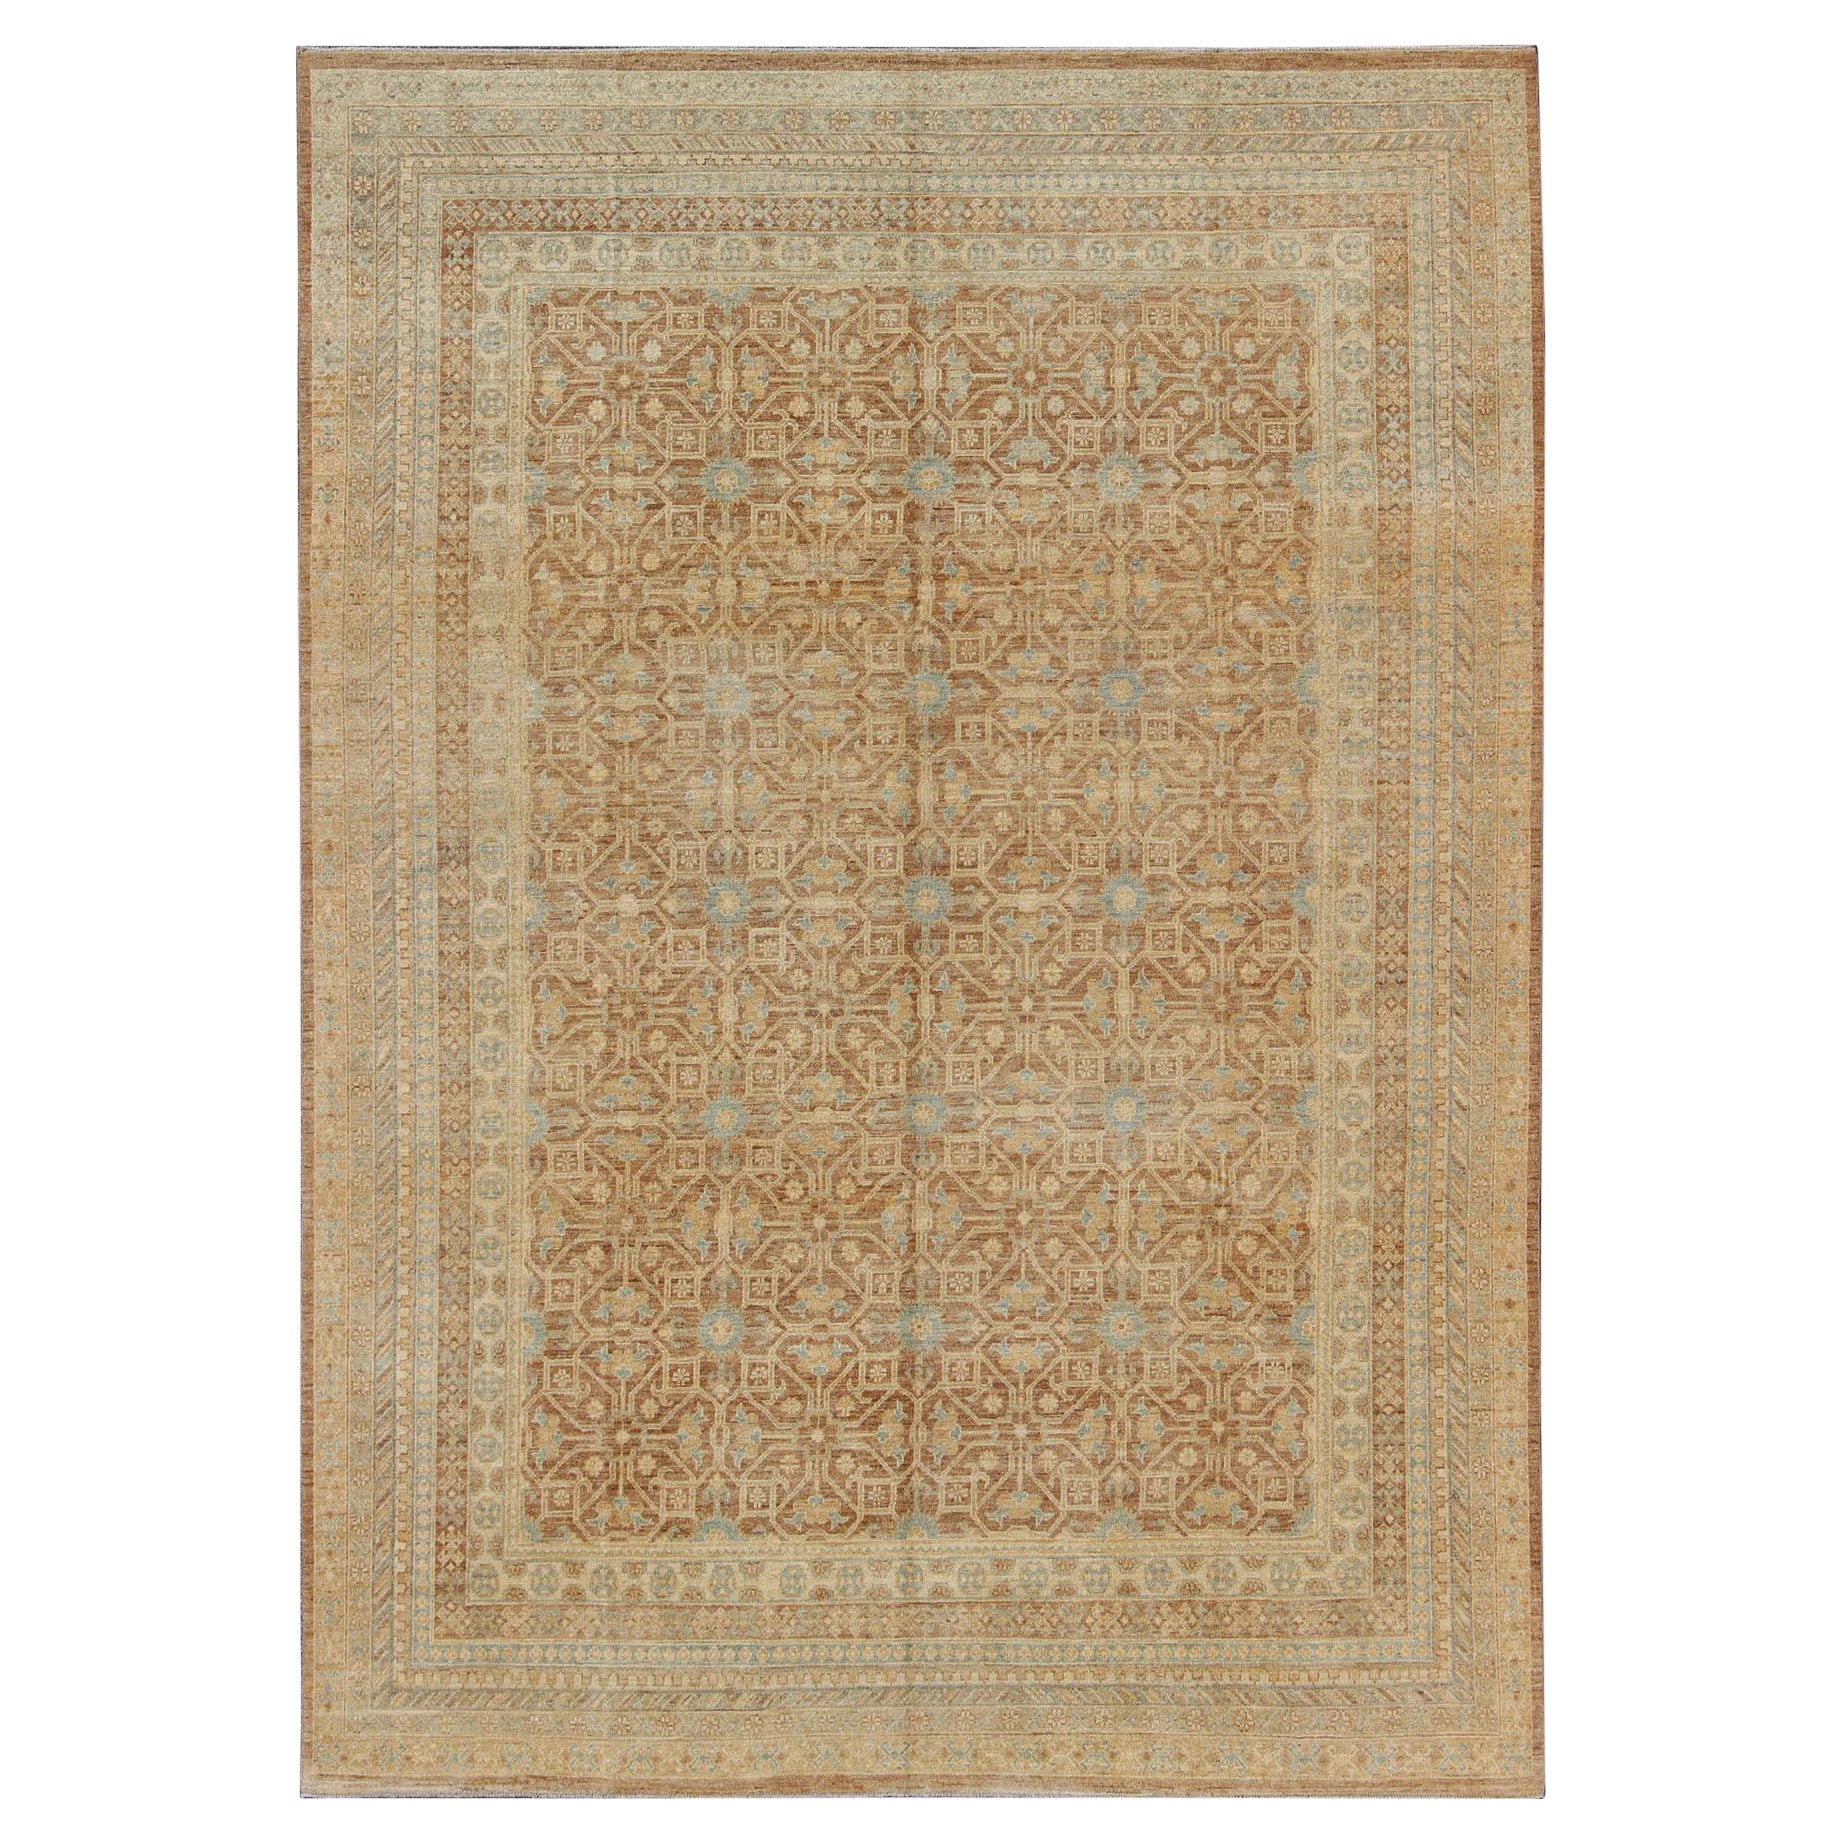 Khotan Design Rug with All-Over Geometric Pattern in Light Brown, Butter & Blue